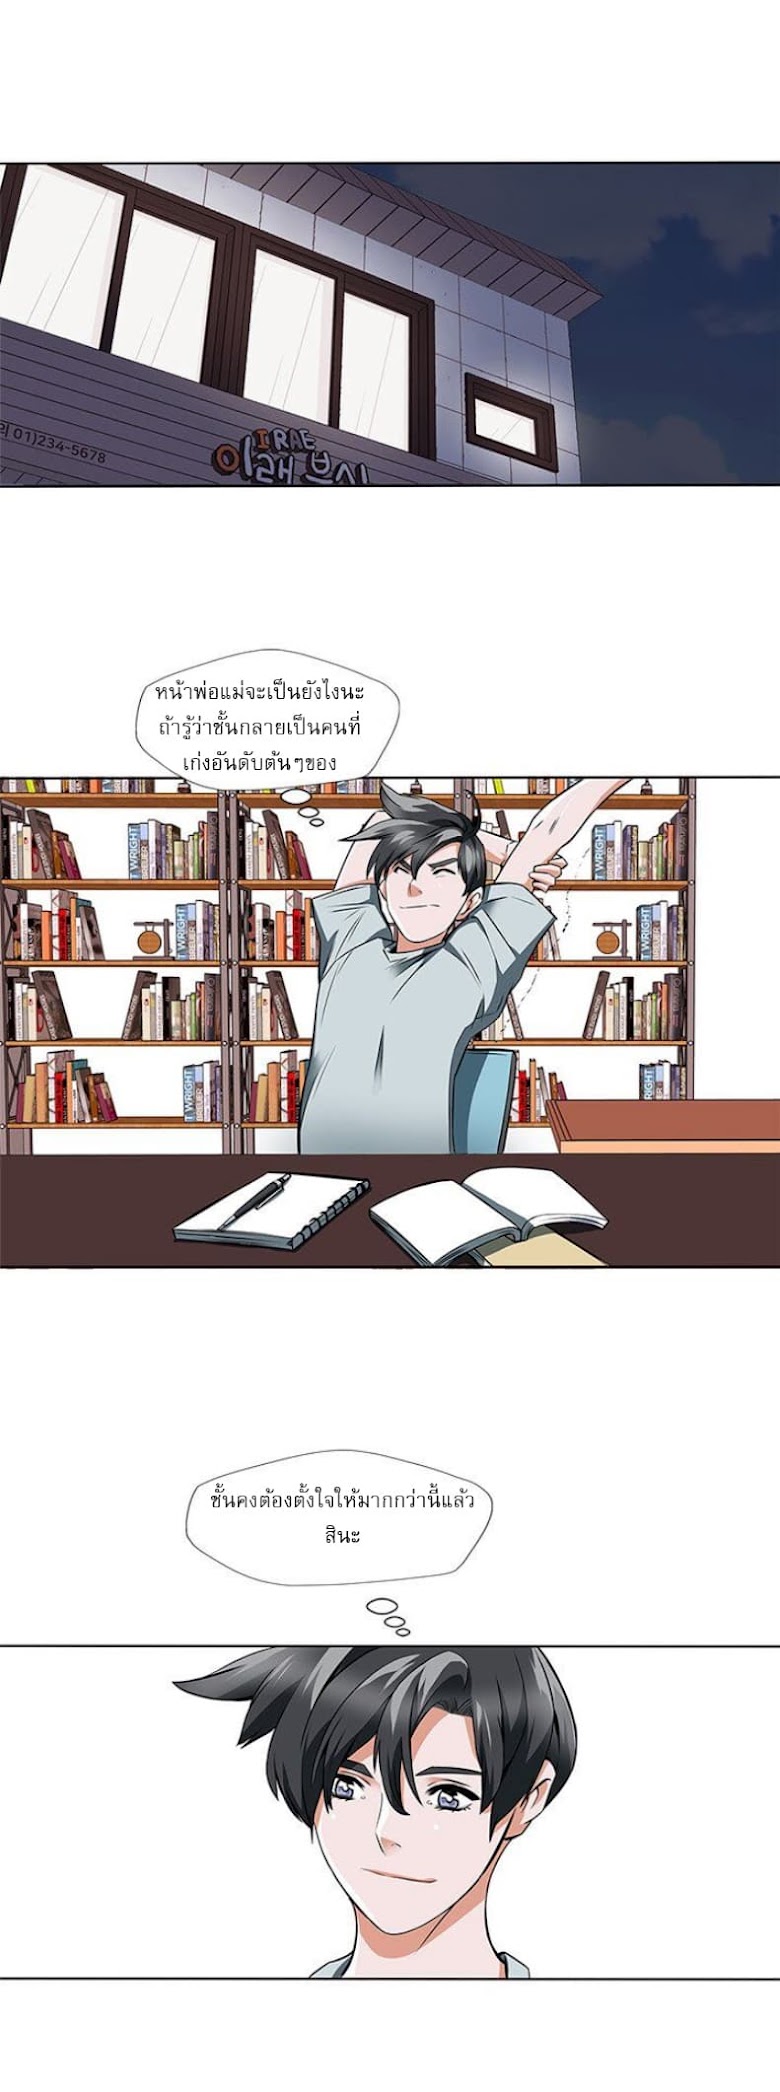 I Stack Experience Through Reading Books - หน้า 13